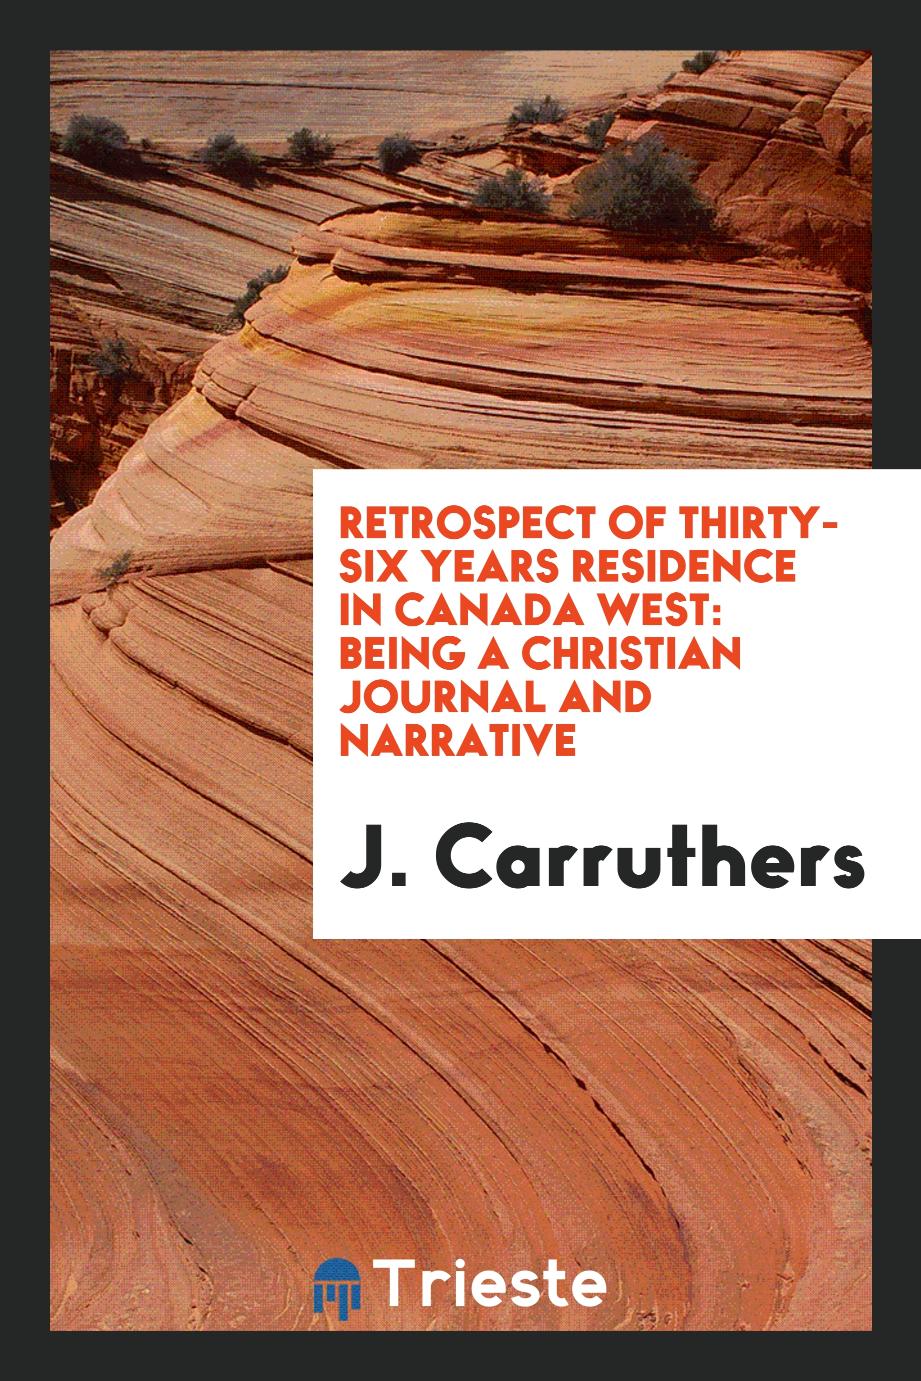 Retrospect of thirty-six years residence in Canada West: being a Christian journal and narrative